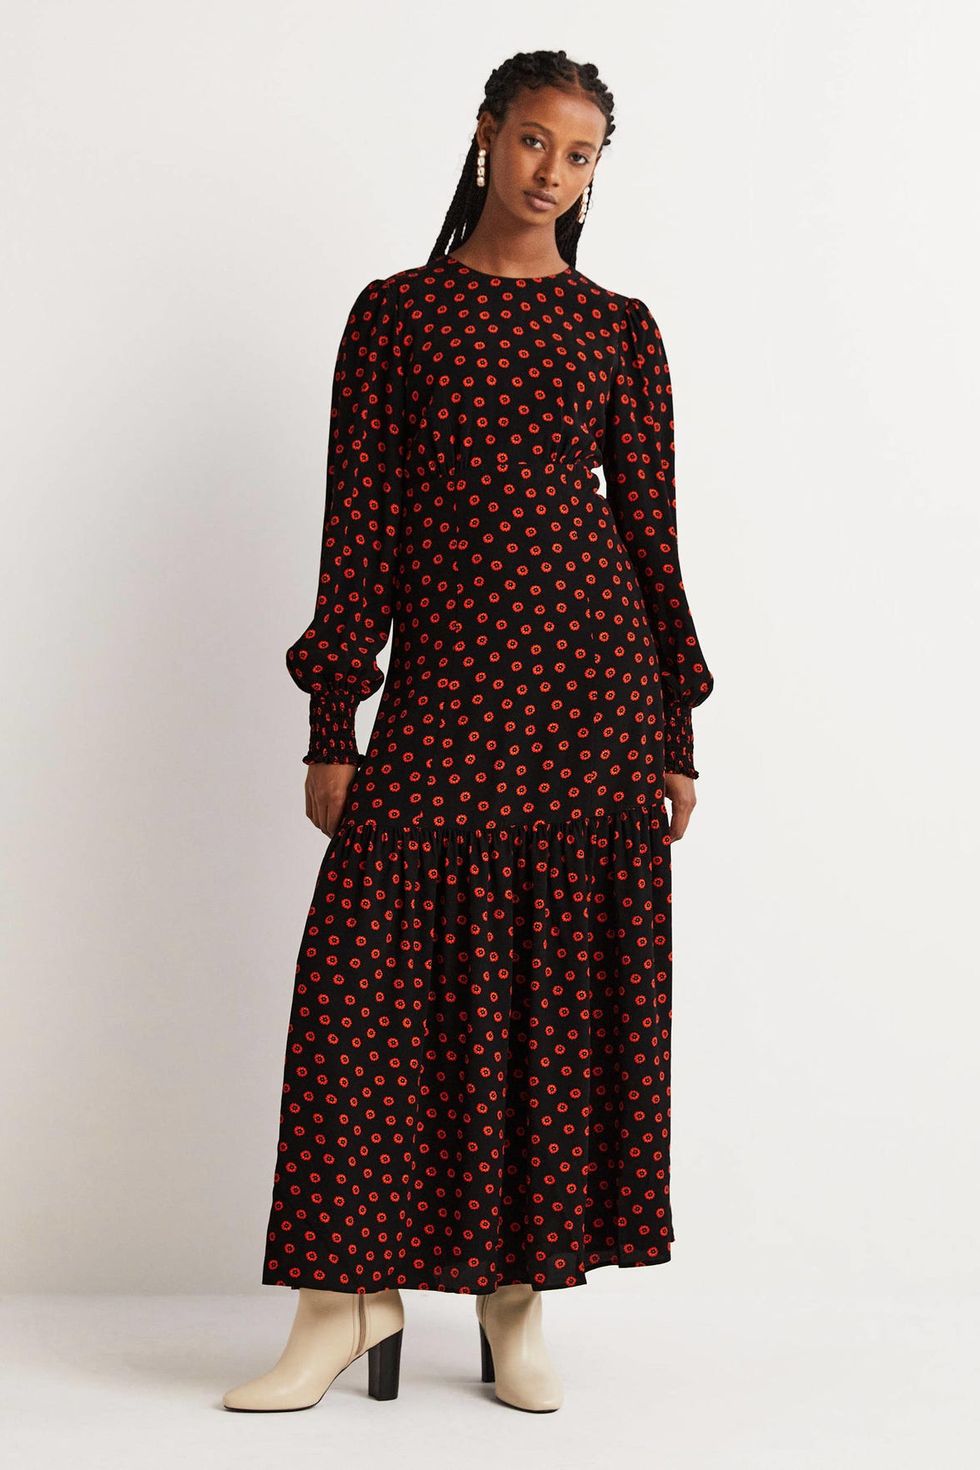 Boden's long-sleeved maxi dress is a flattering choice